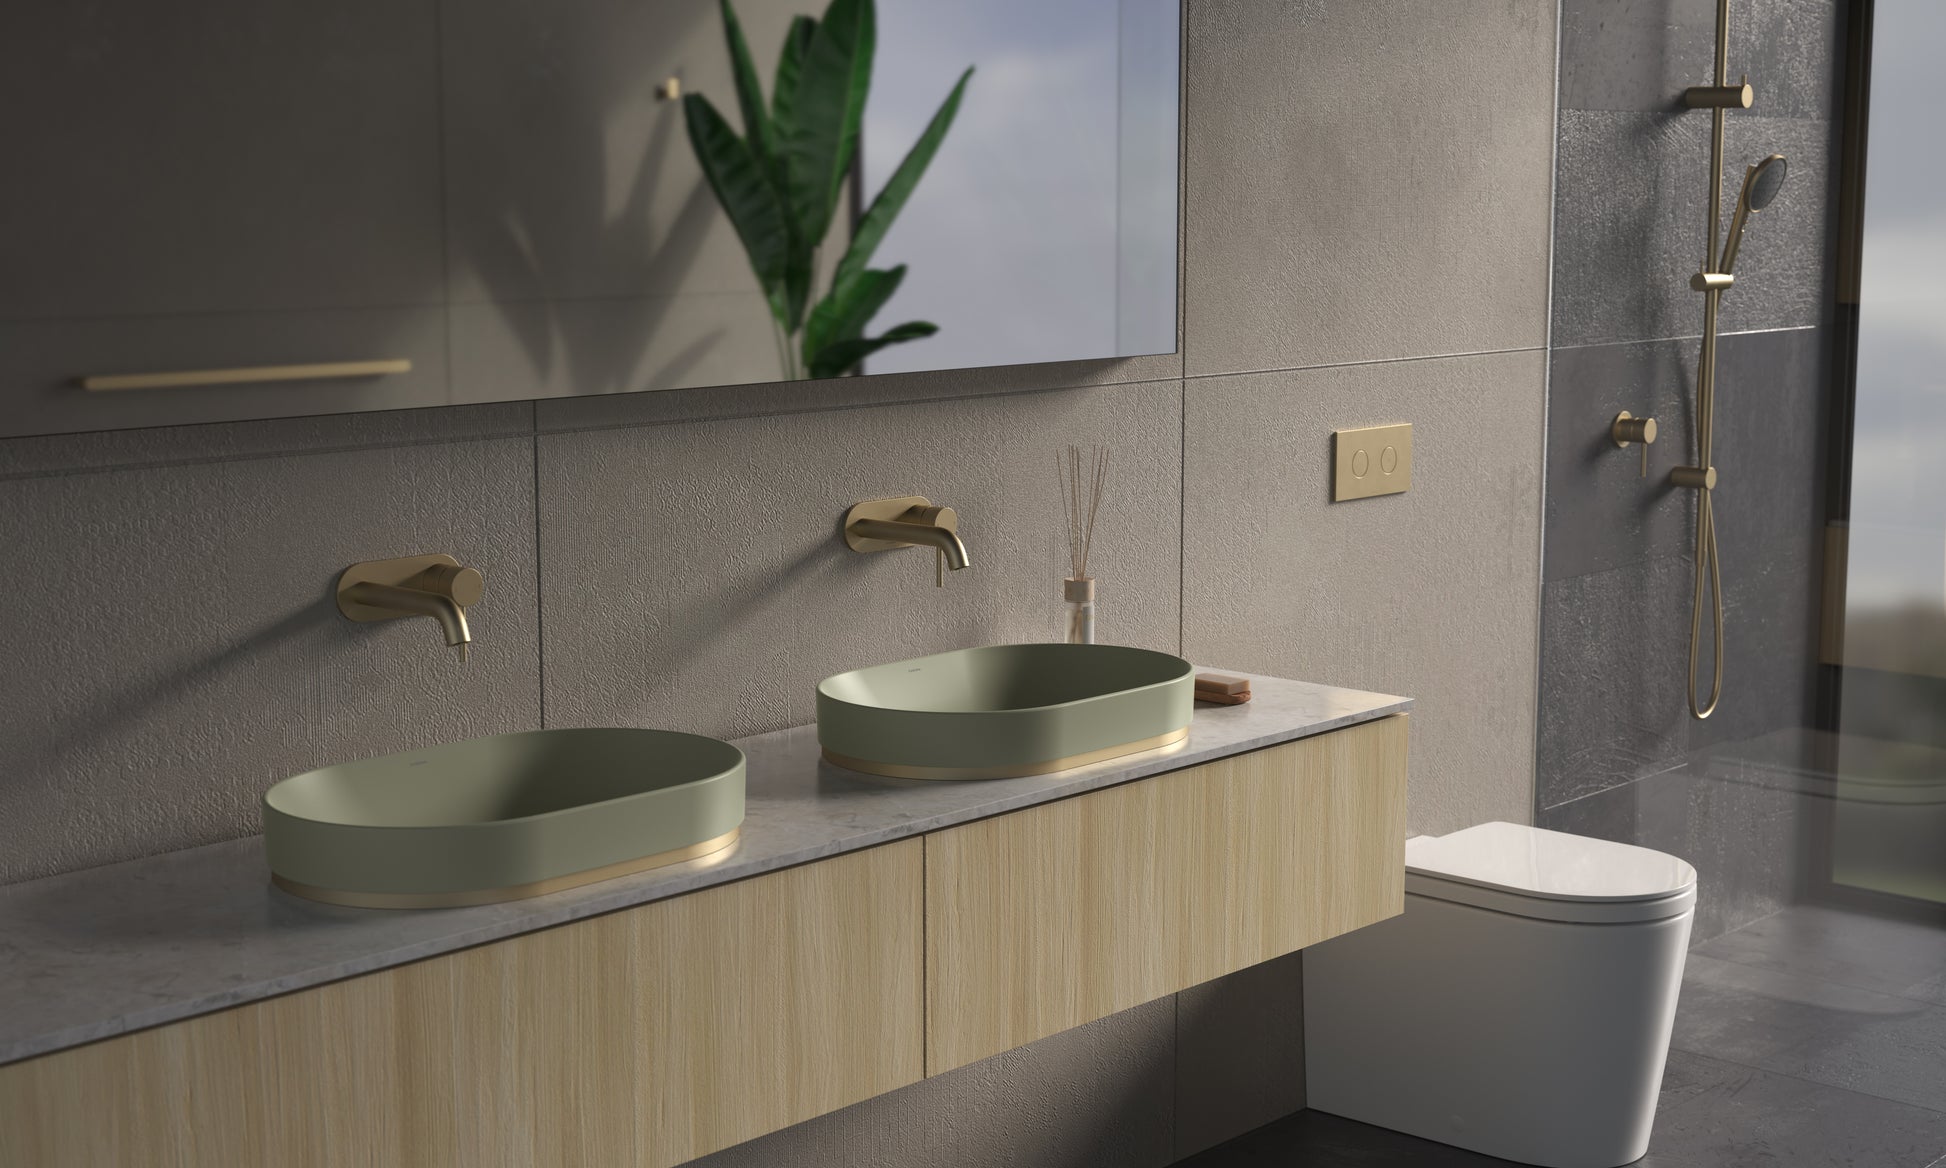 Liano II 530 pill inset basin in green from Caroma